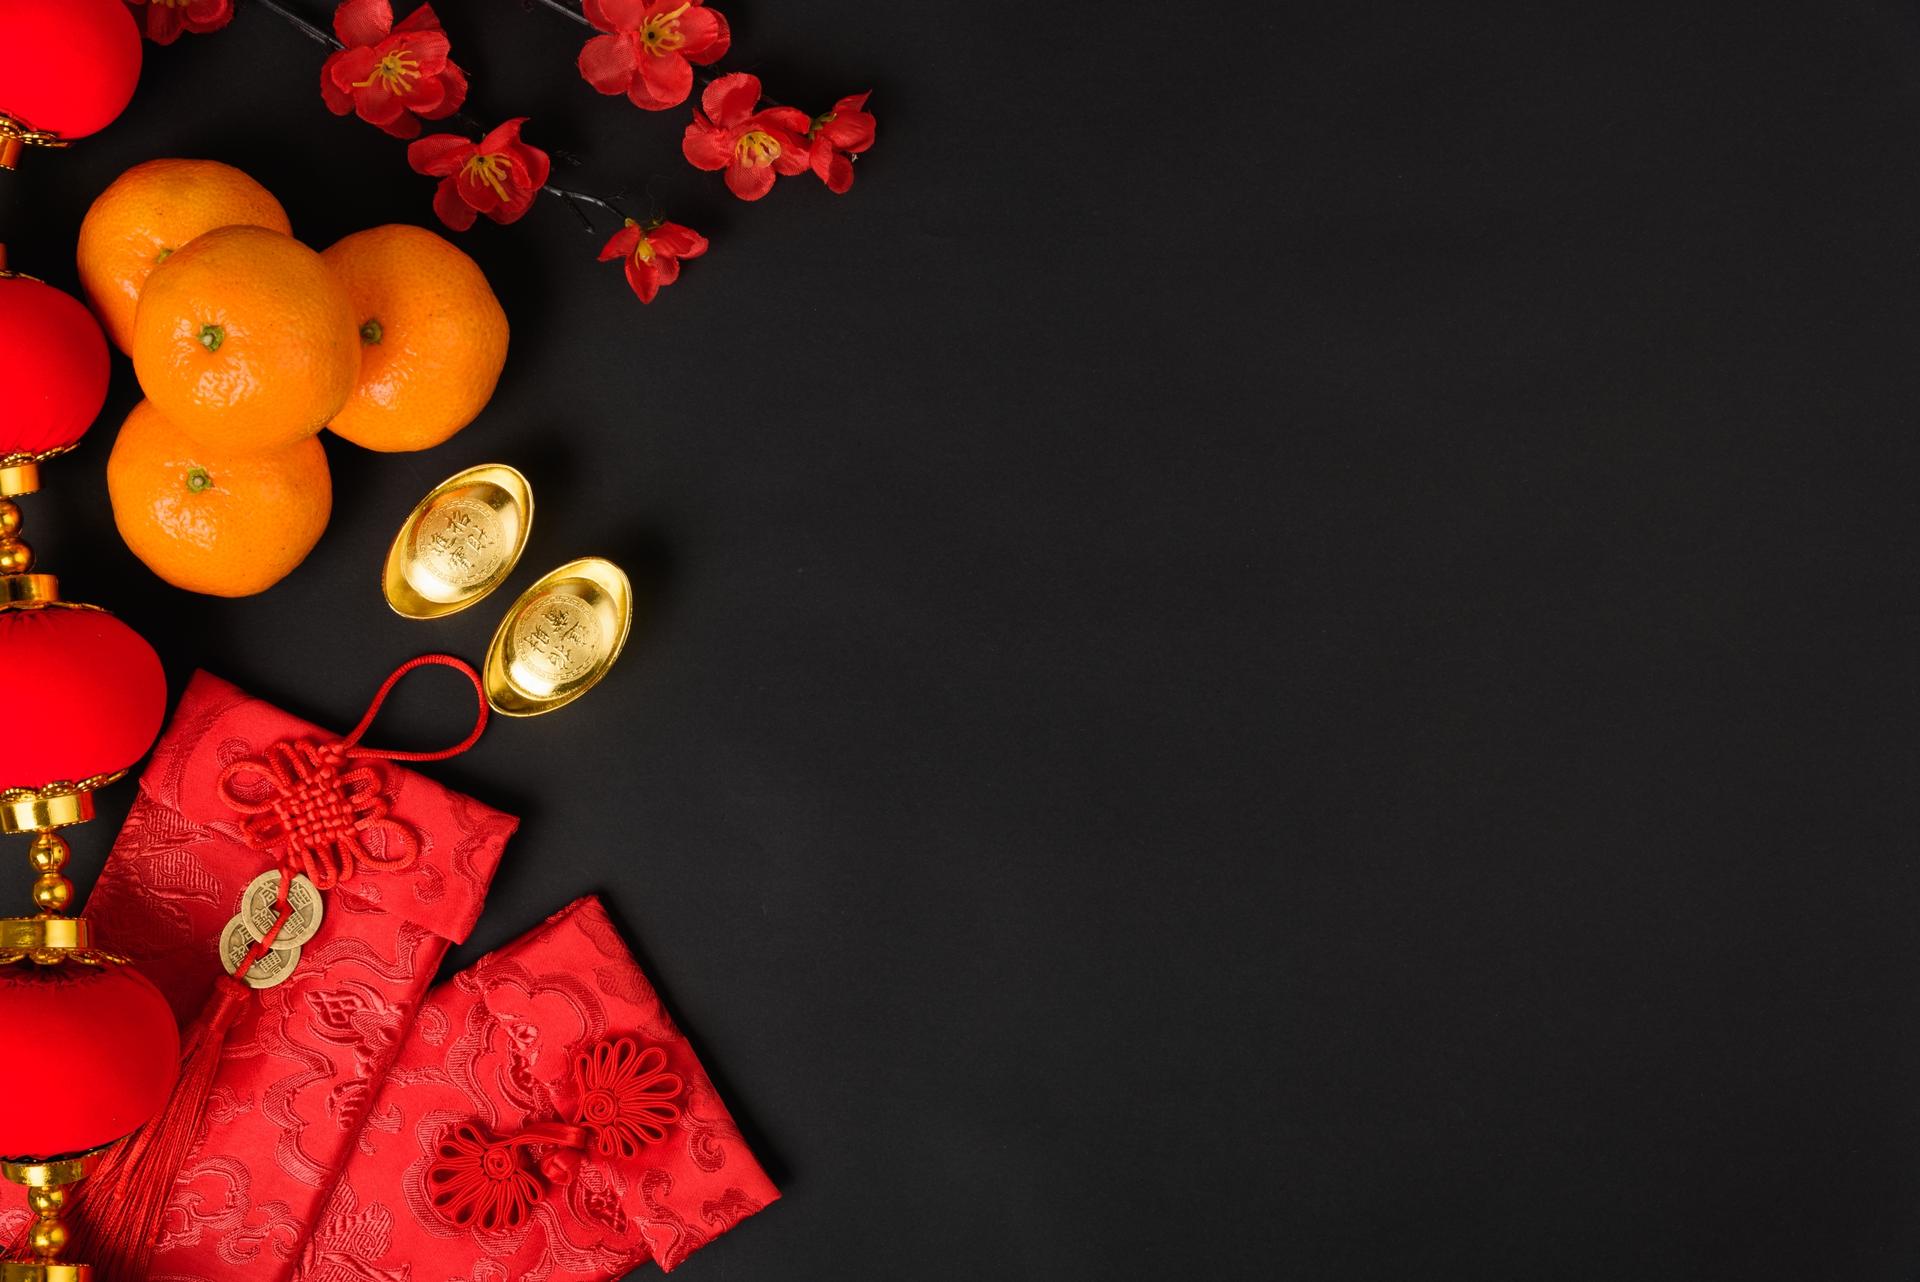 Red envelopes traditionally opened during celebrations like Chinese New Year